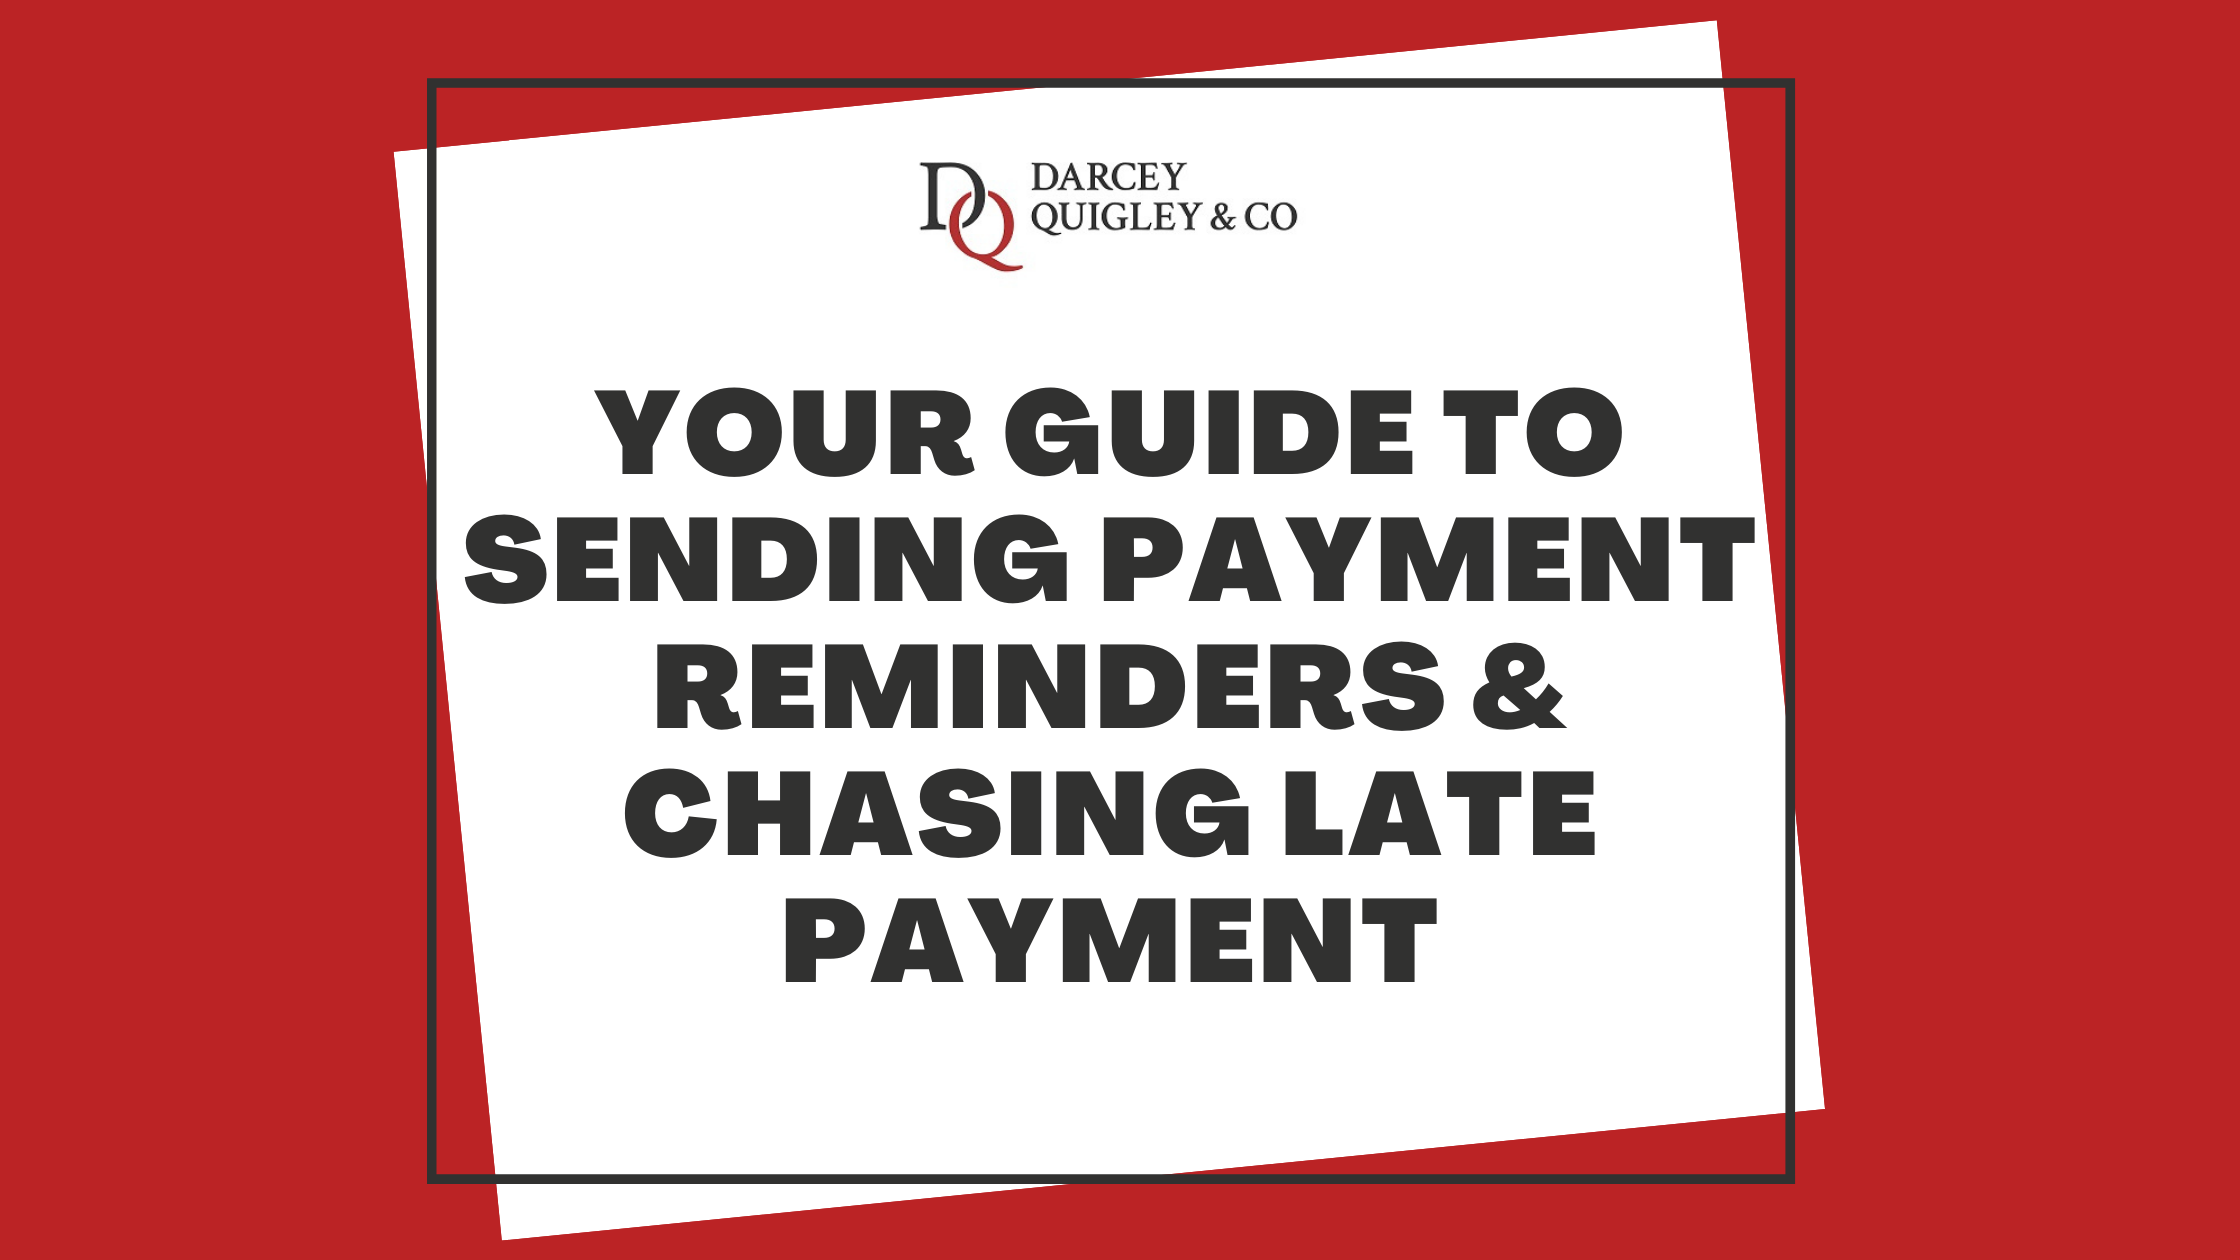 Your Guide to Sending Payment Reminders & Chasing Late Payment